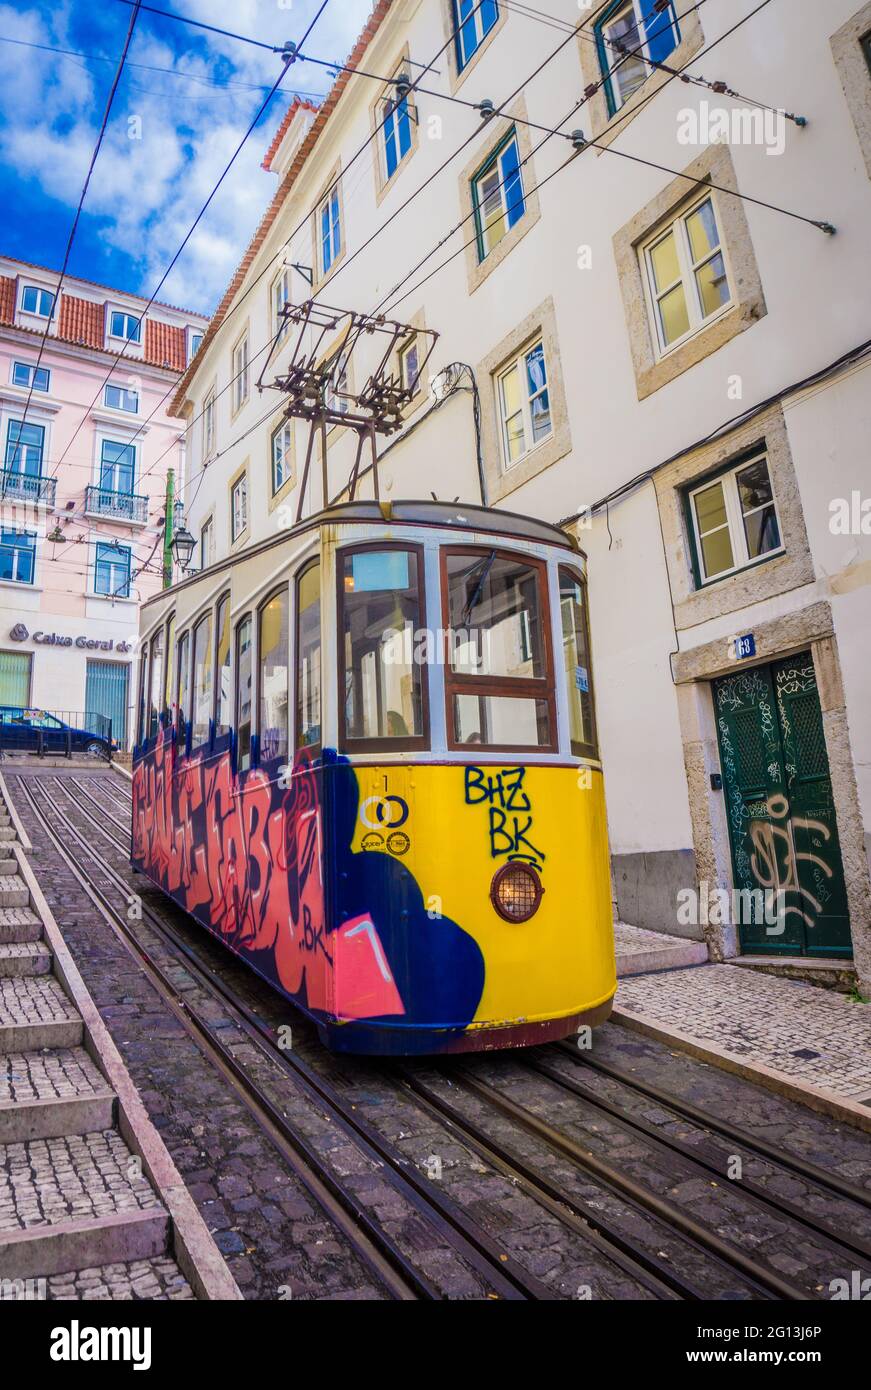 LISBON, PORTUGAL - MARCH 25, 2017: Bica Funicular or Elevador da Bica funicular railway line in Lisbon, Portugal Stock Photo